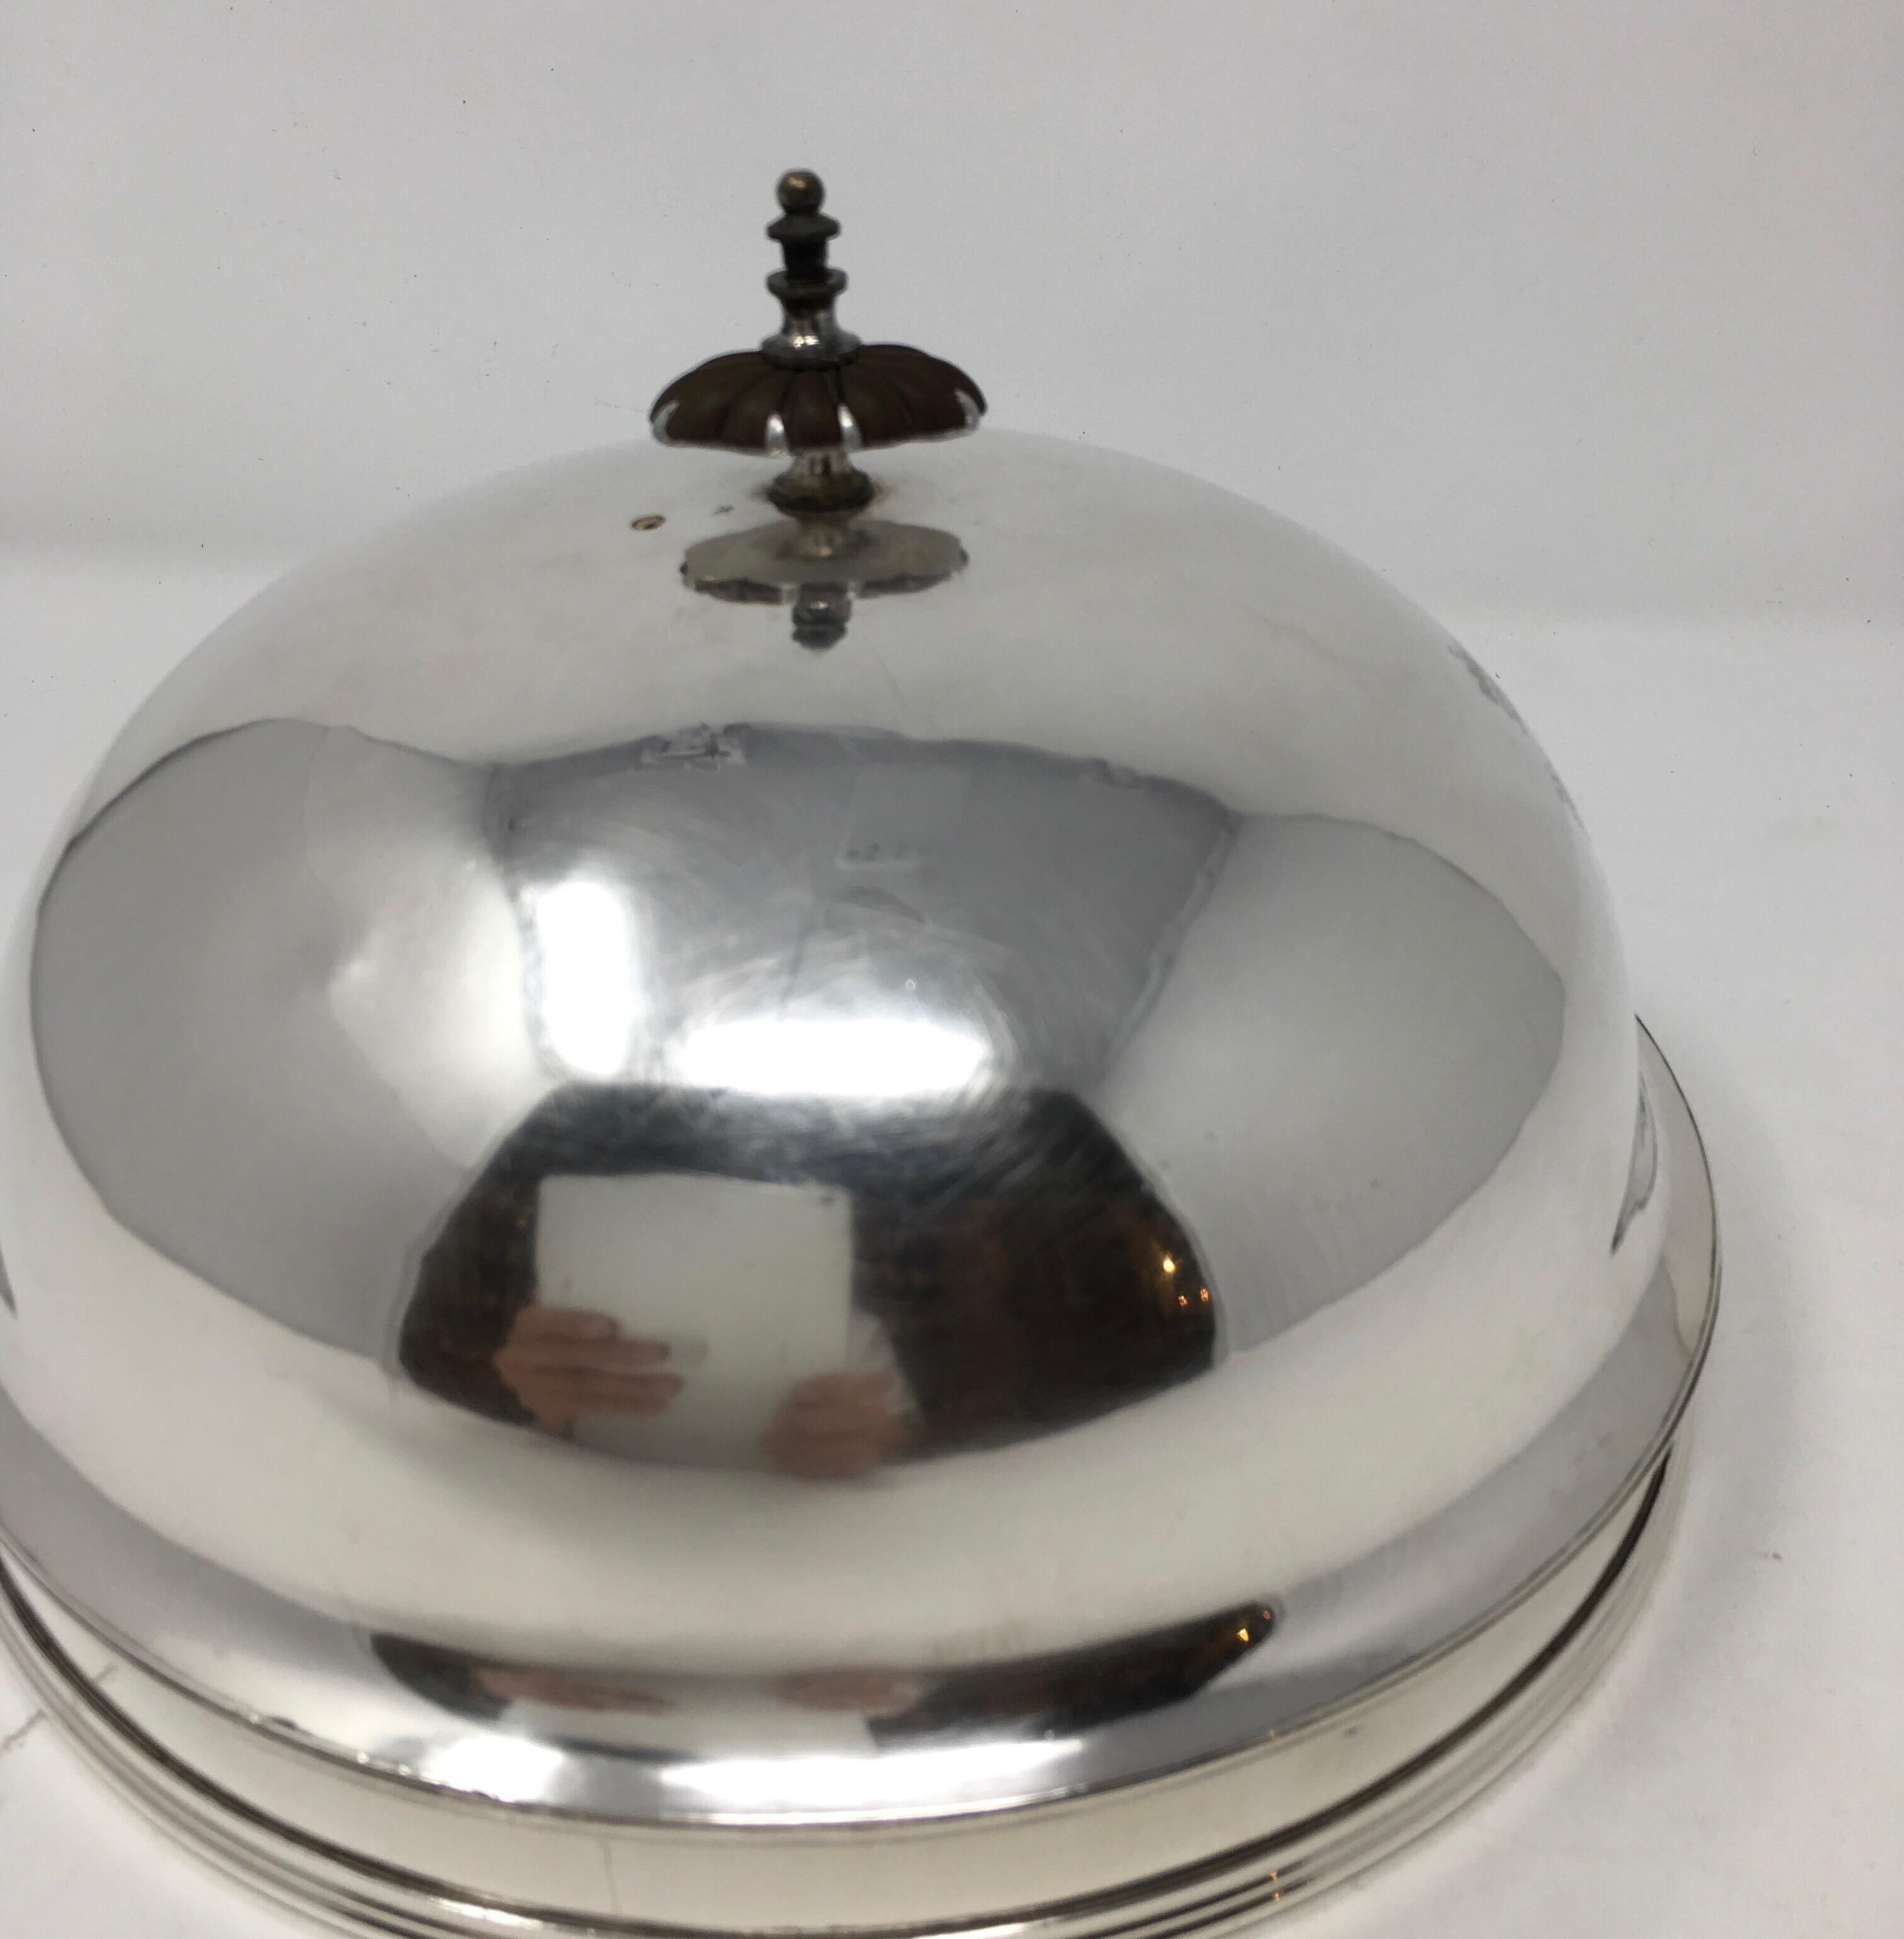 This vintage hotel silver food dome found in France is marked with a crown, dragon and stag as pictured. Beautiful patina with minor wear as expected.